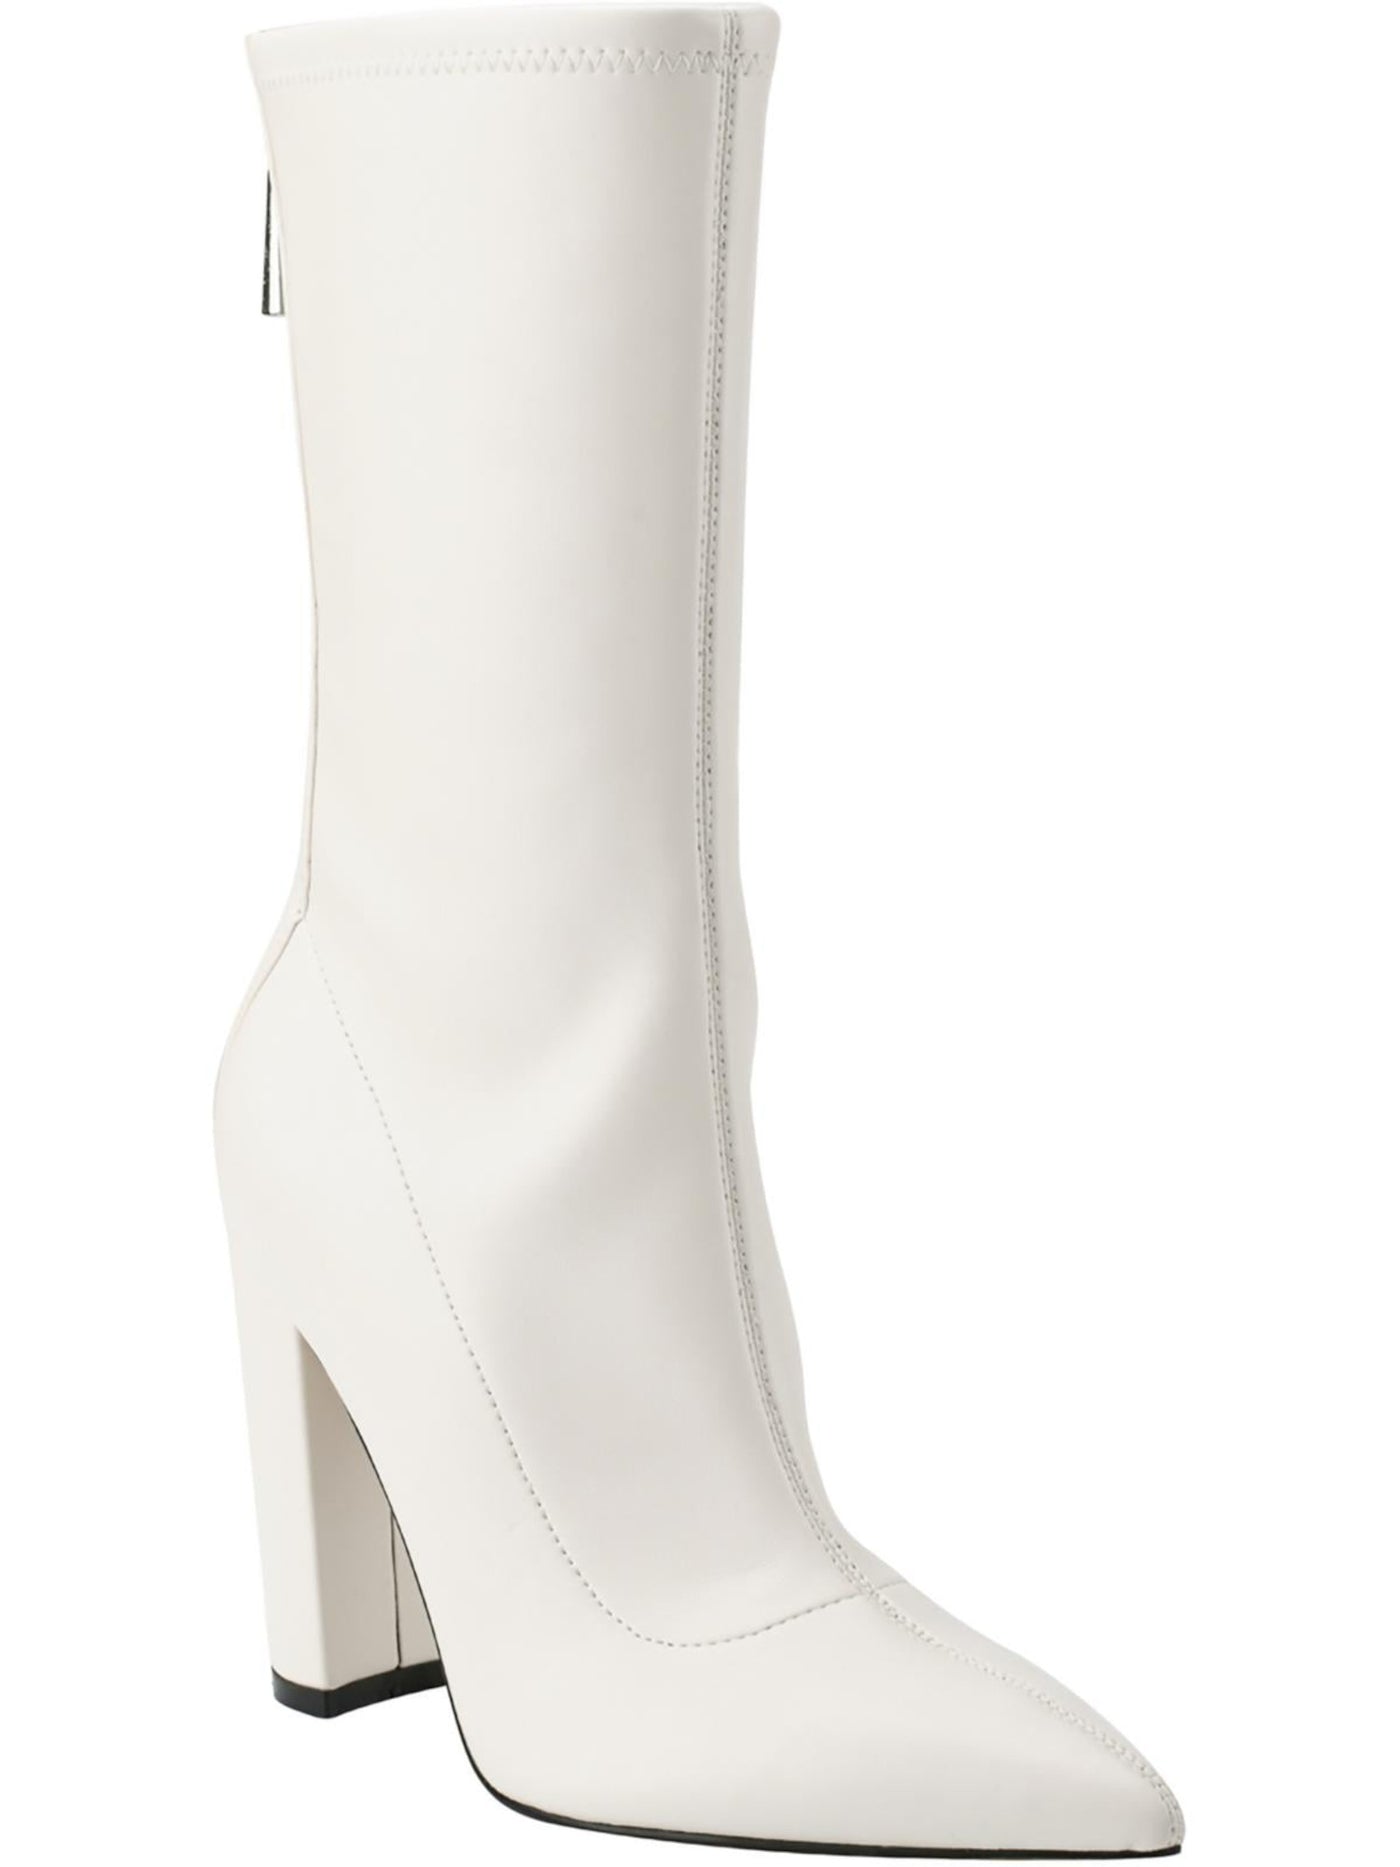 GUESS Womens Ivory Abbale Pointy Toe Block Heel Zip-Up Dress Boots 7.5 M